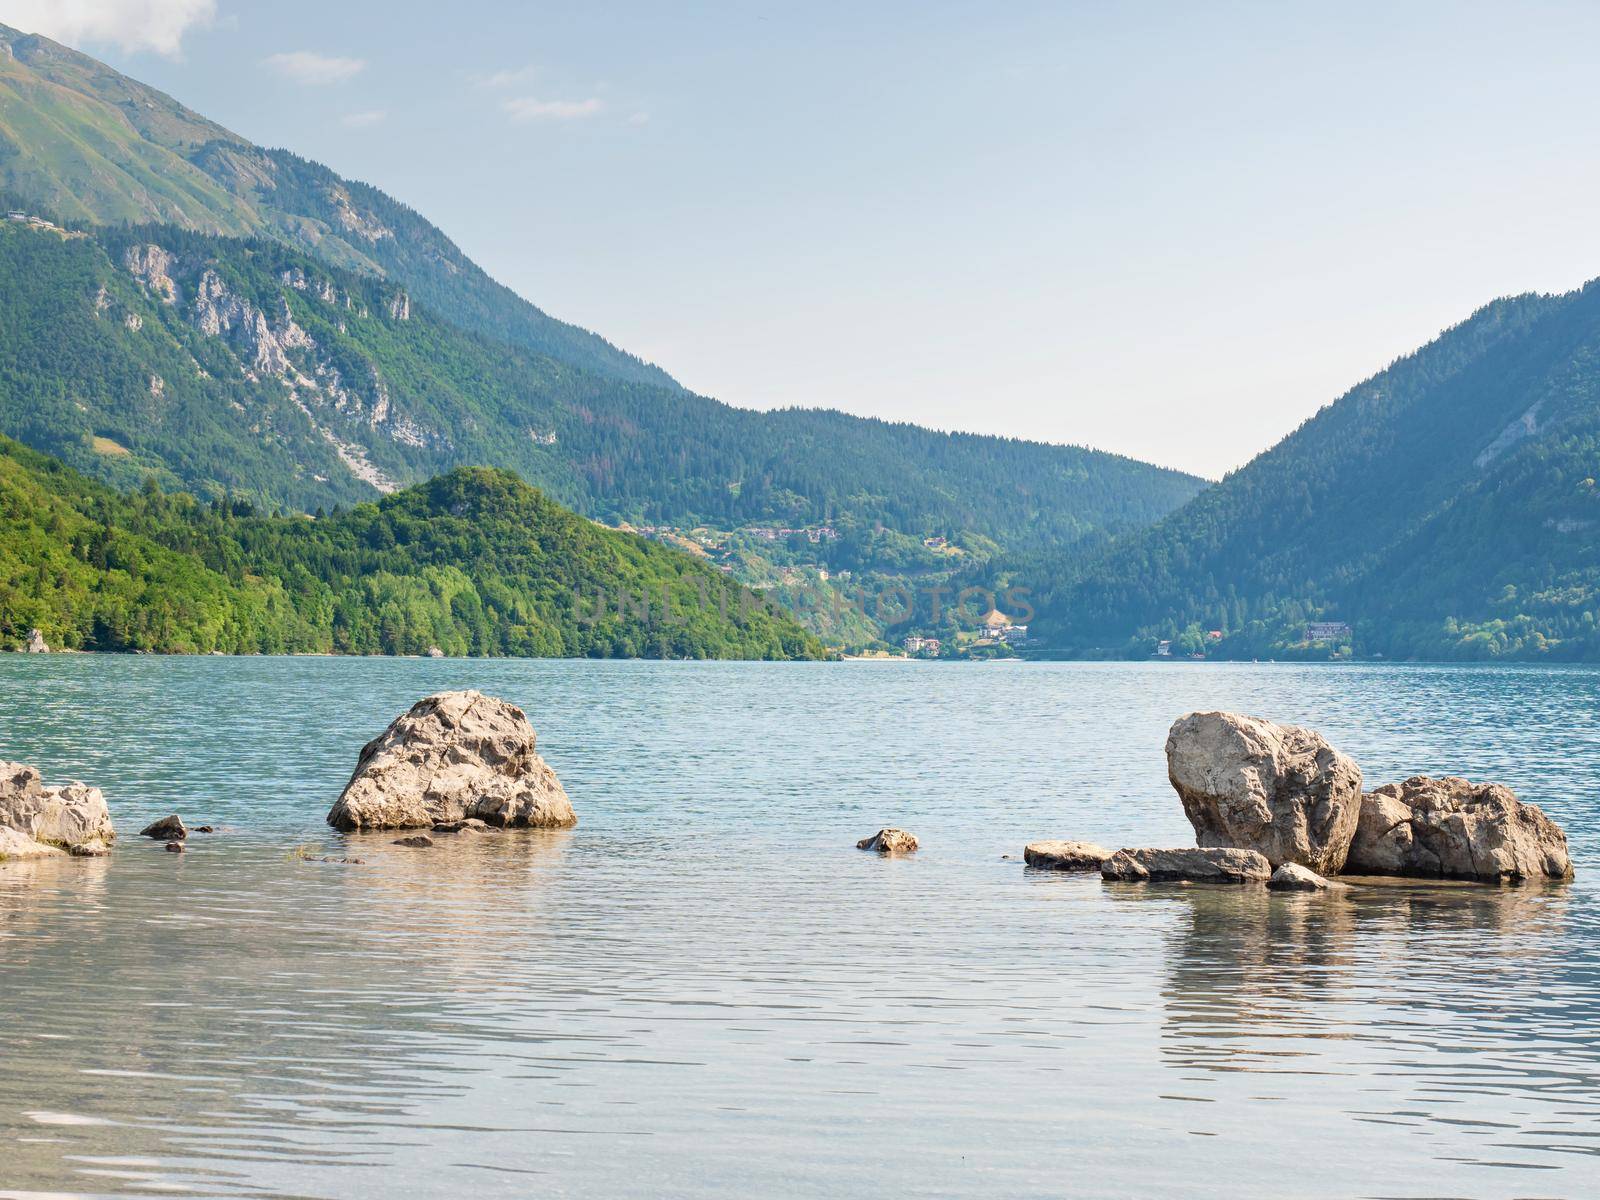 Stones stack on shore of blue green water of mountain lake Molveno.  by rdonar2